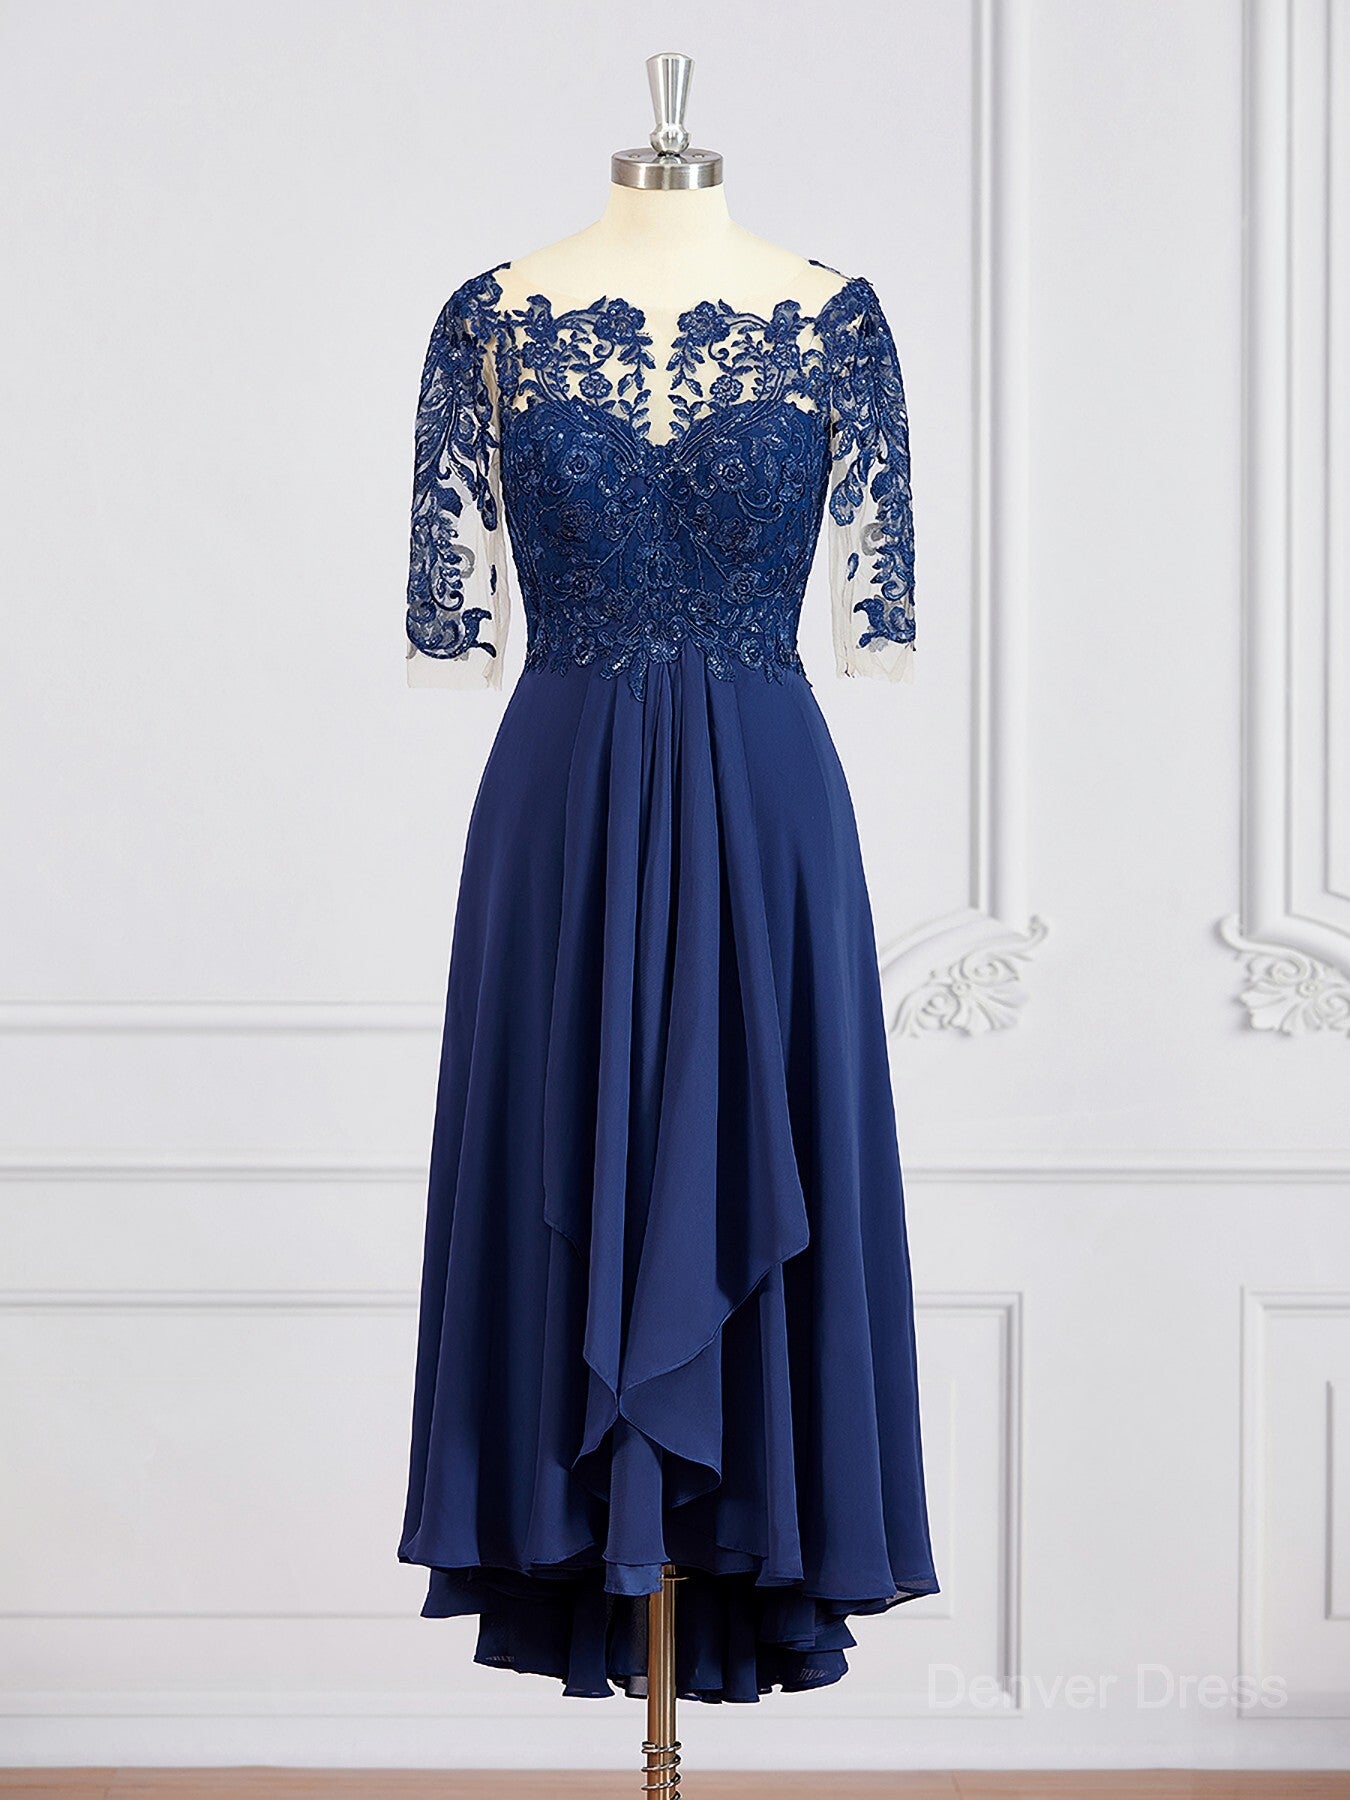 A-Line Bateau Tea-Length Chiffon Mother of the Bride Dresses For Black girls With Appliques Lace